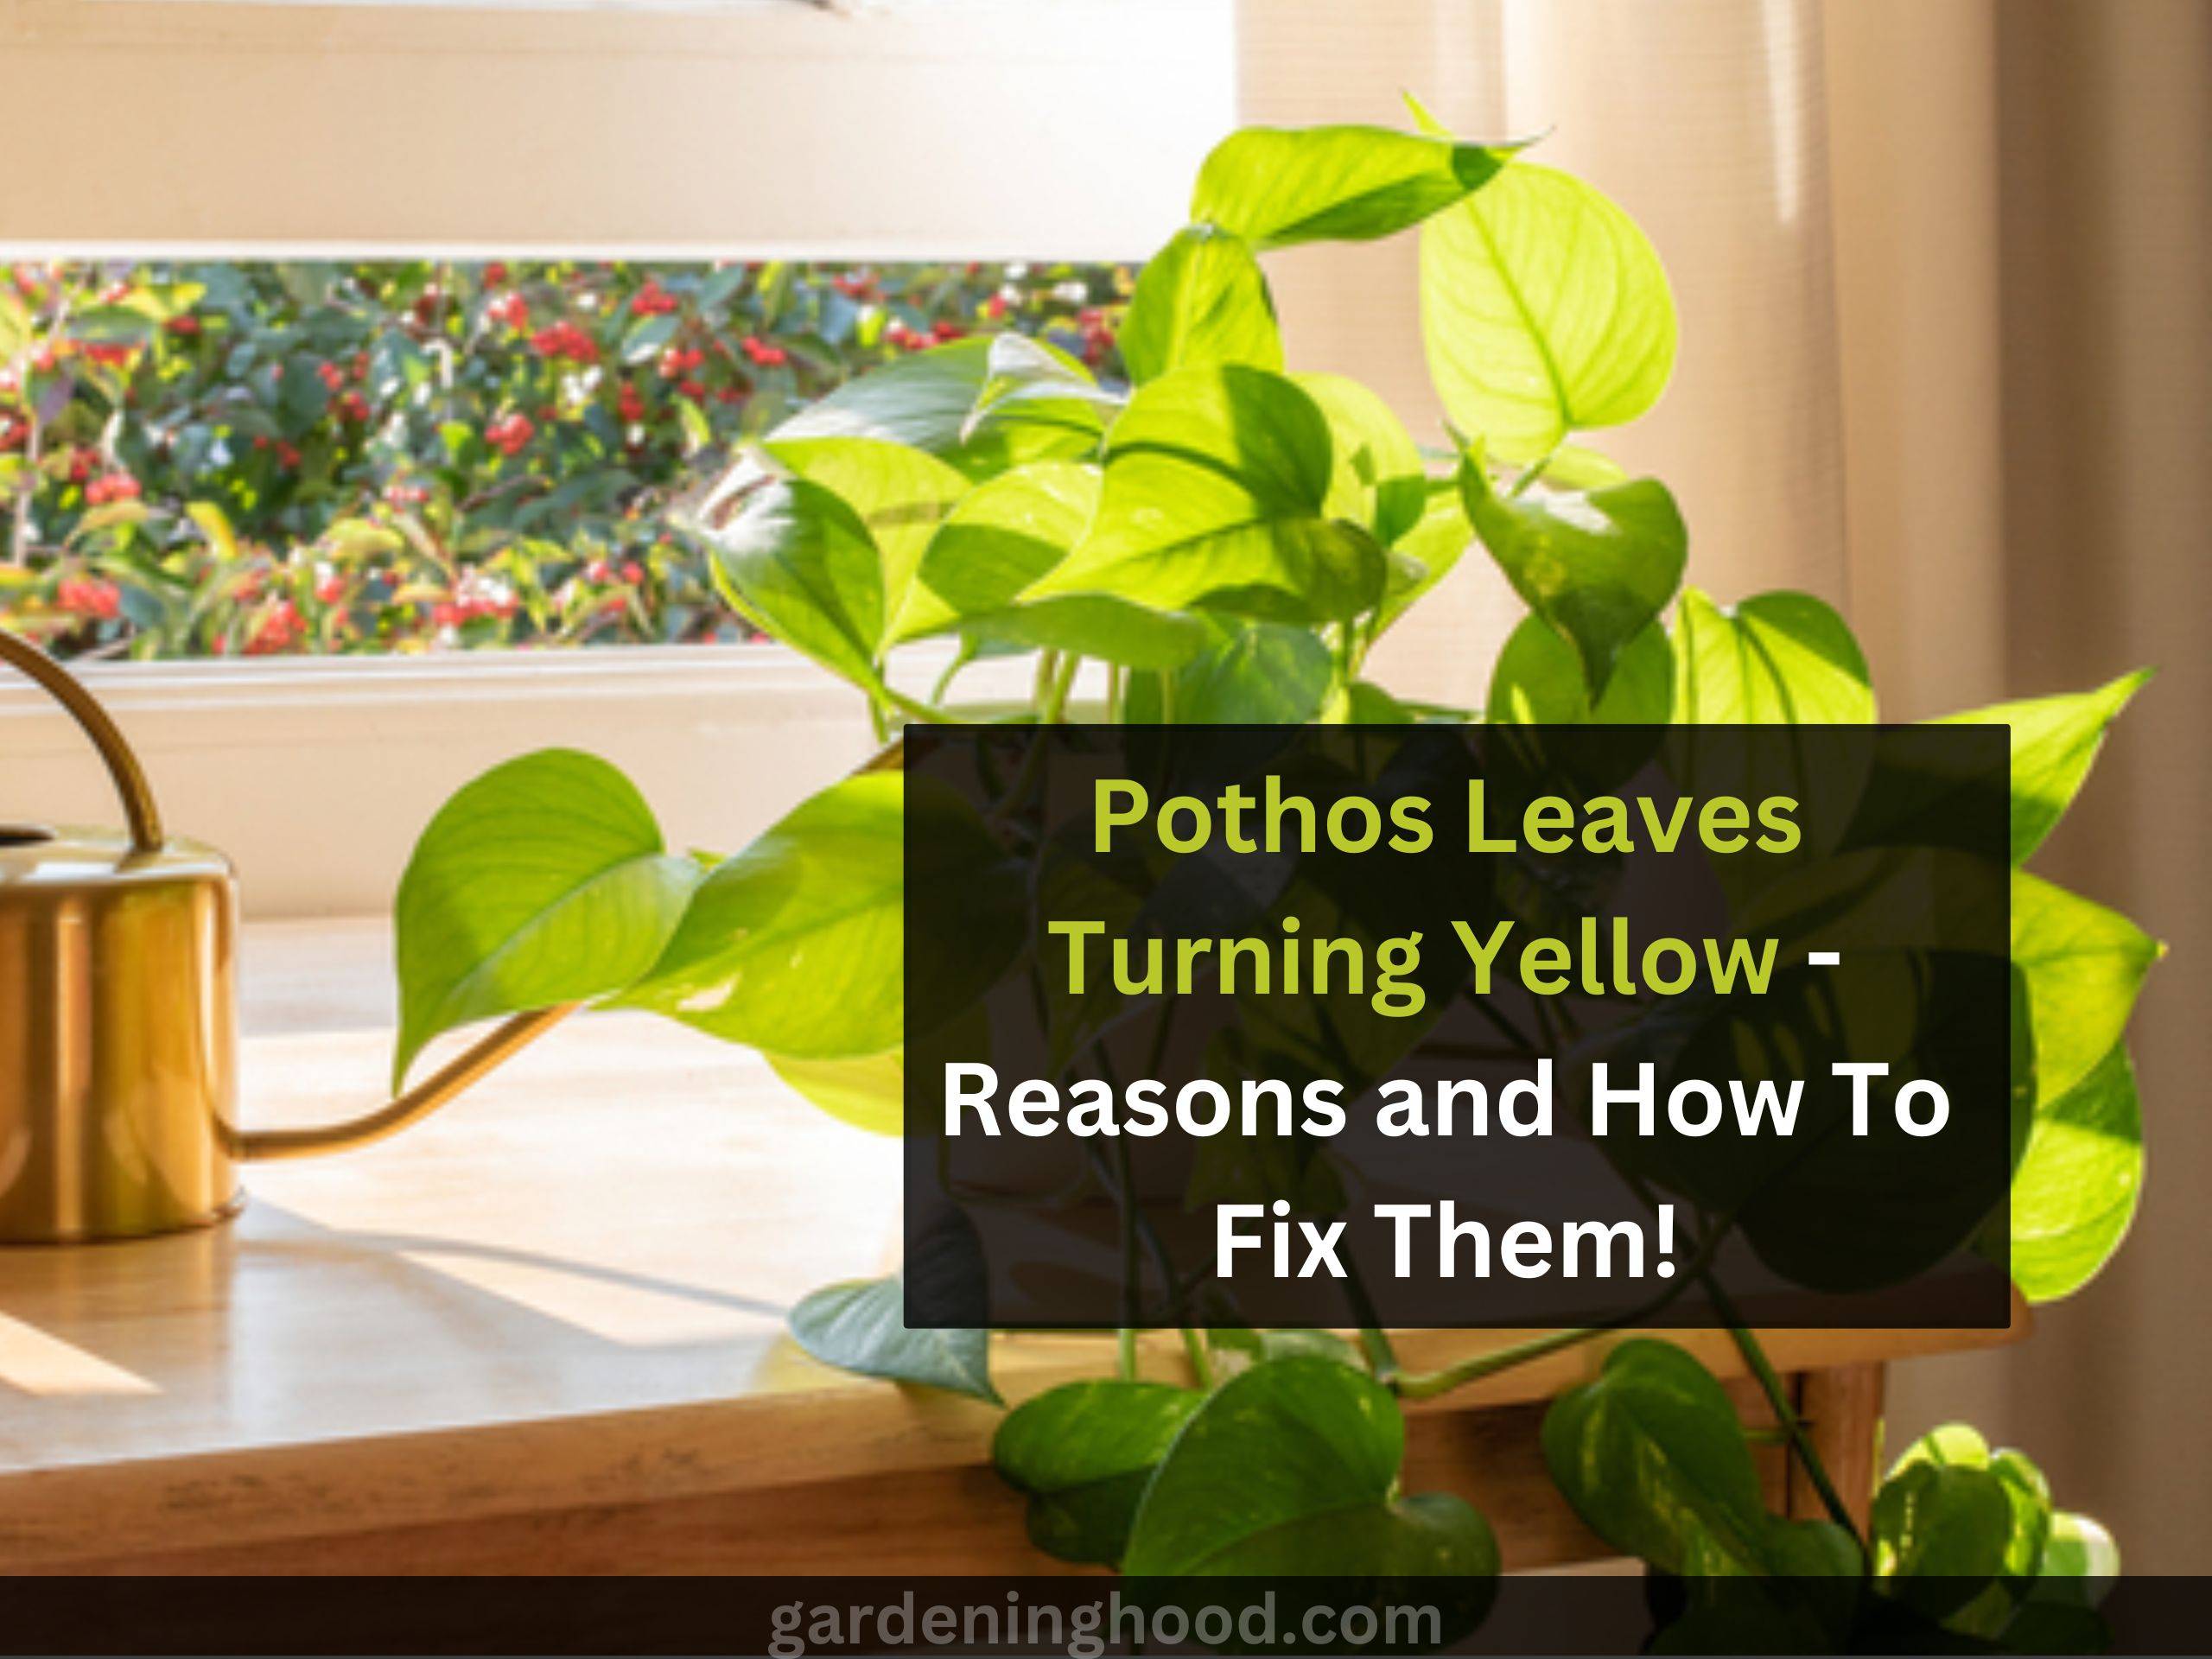 Pothos Leaves Turning Yellow - Reasons and How To Fix Them!